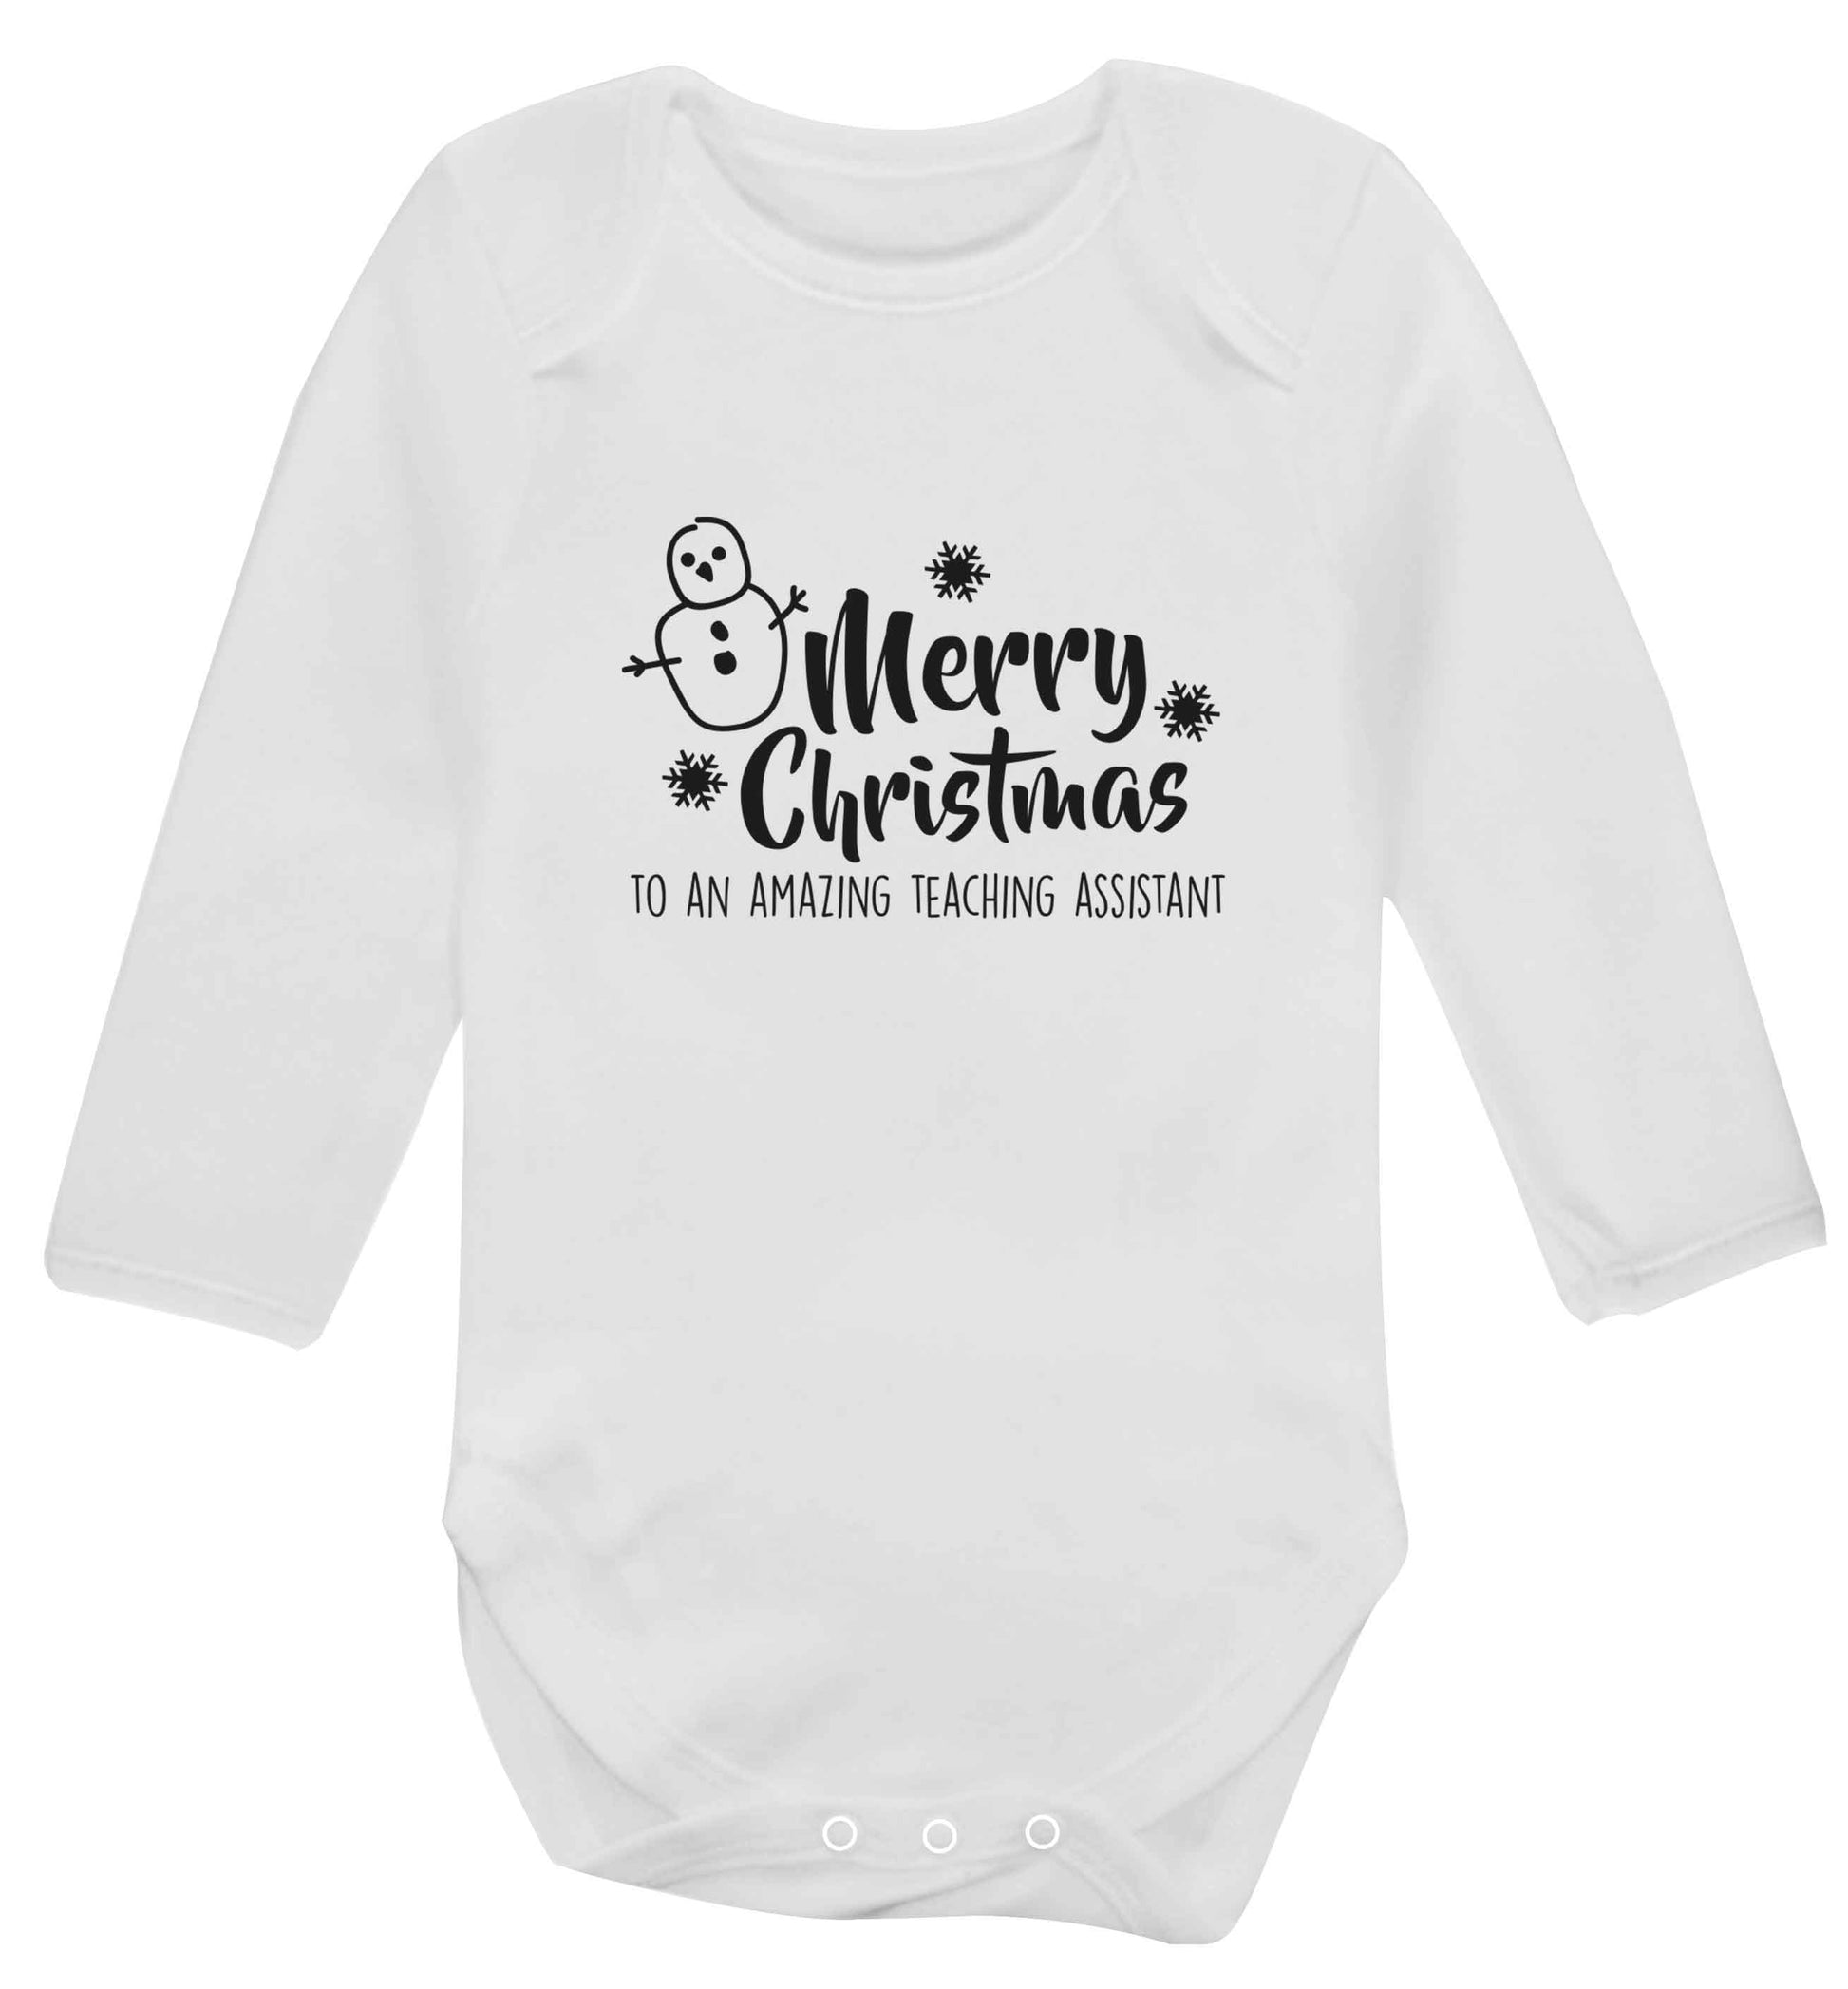 Merry christmas to my teacher baby vest long sleeved white 6-12 months